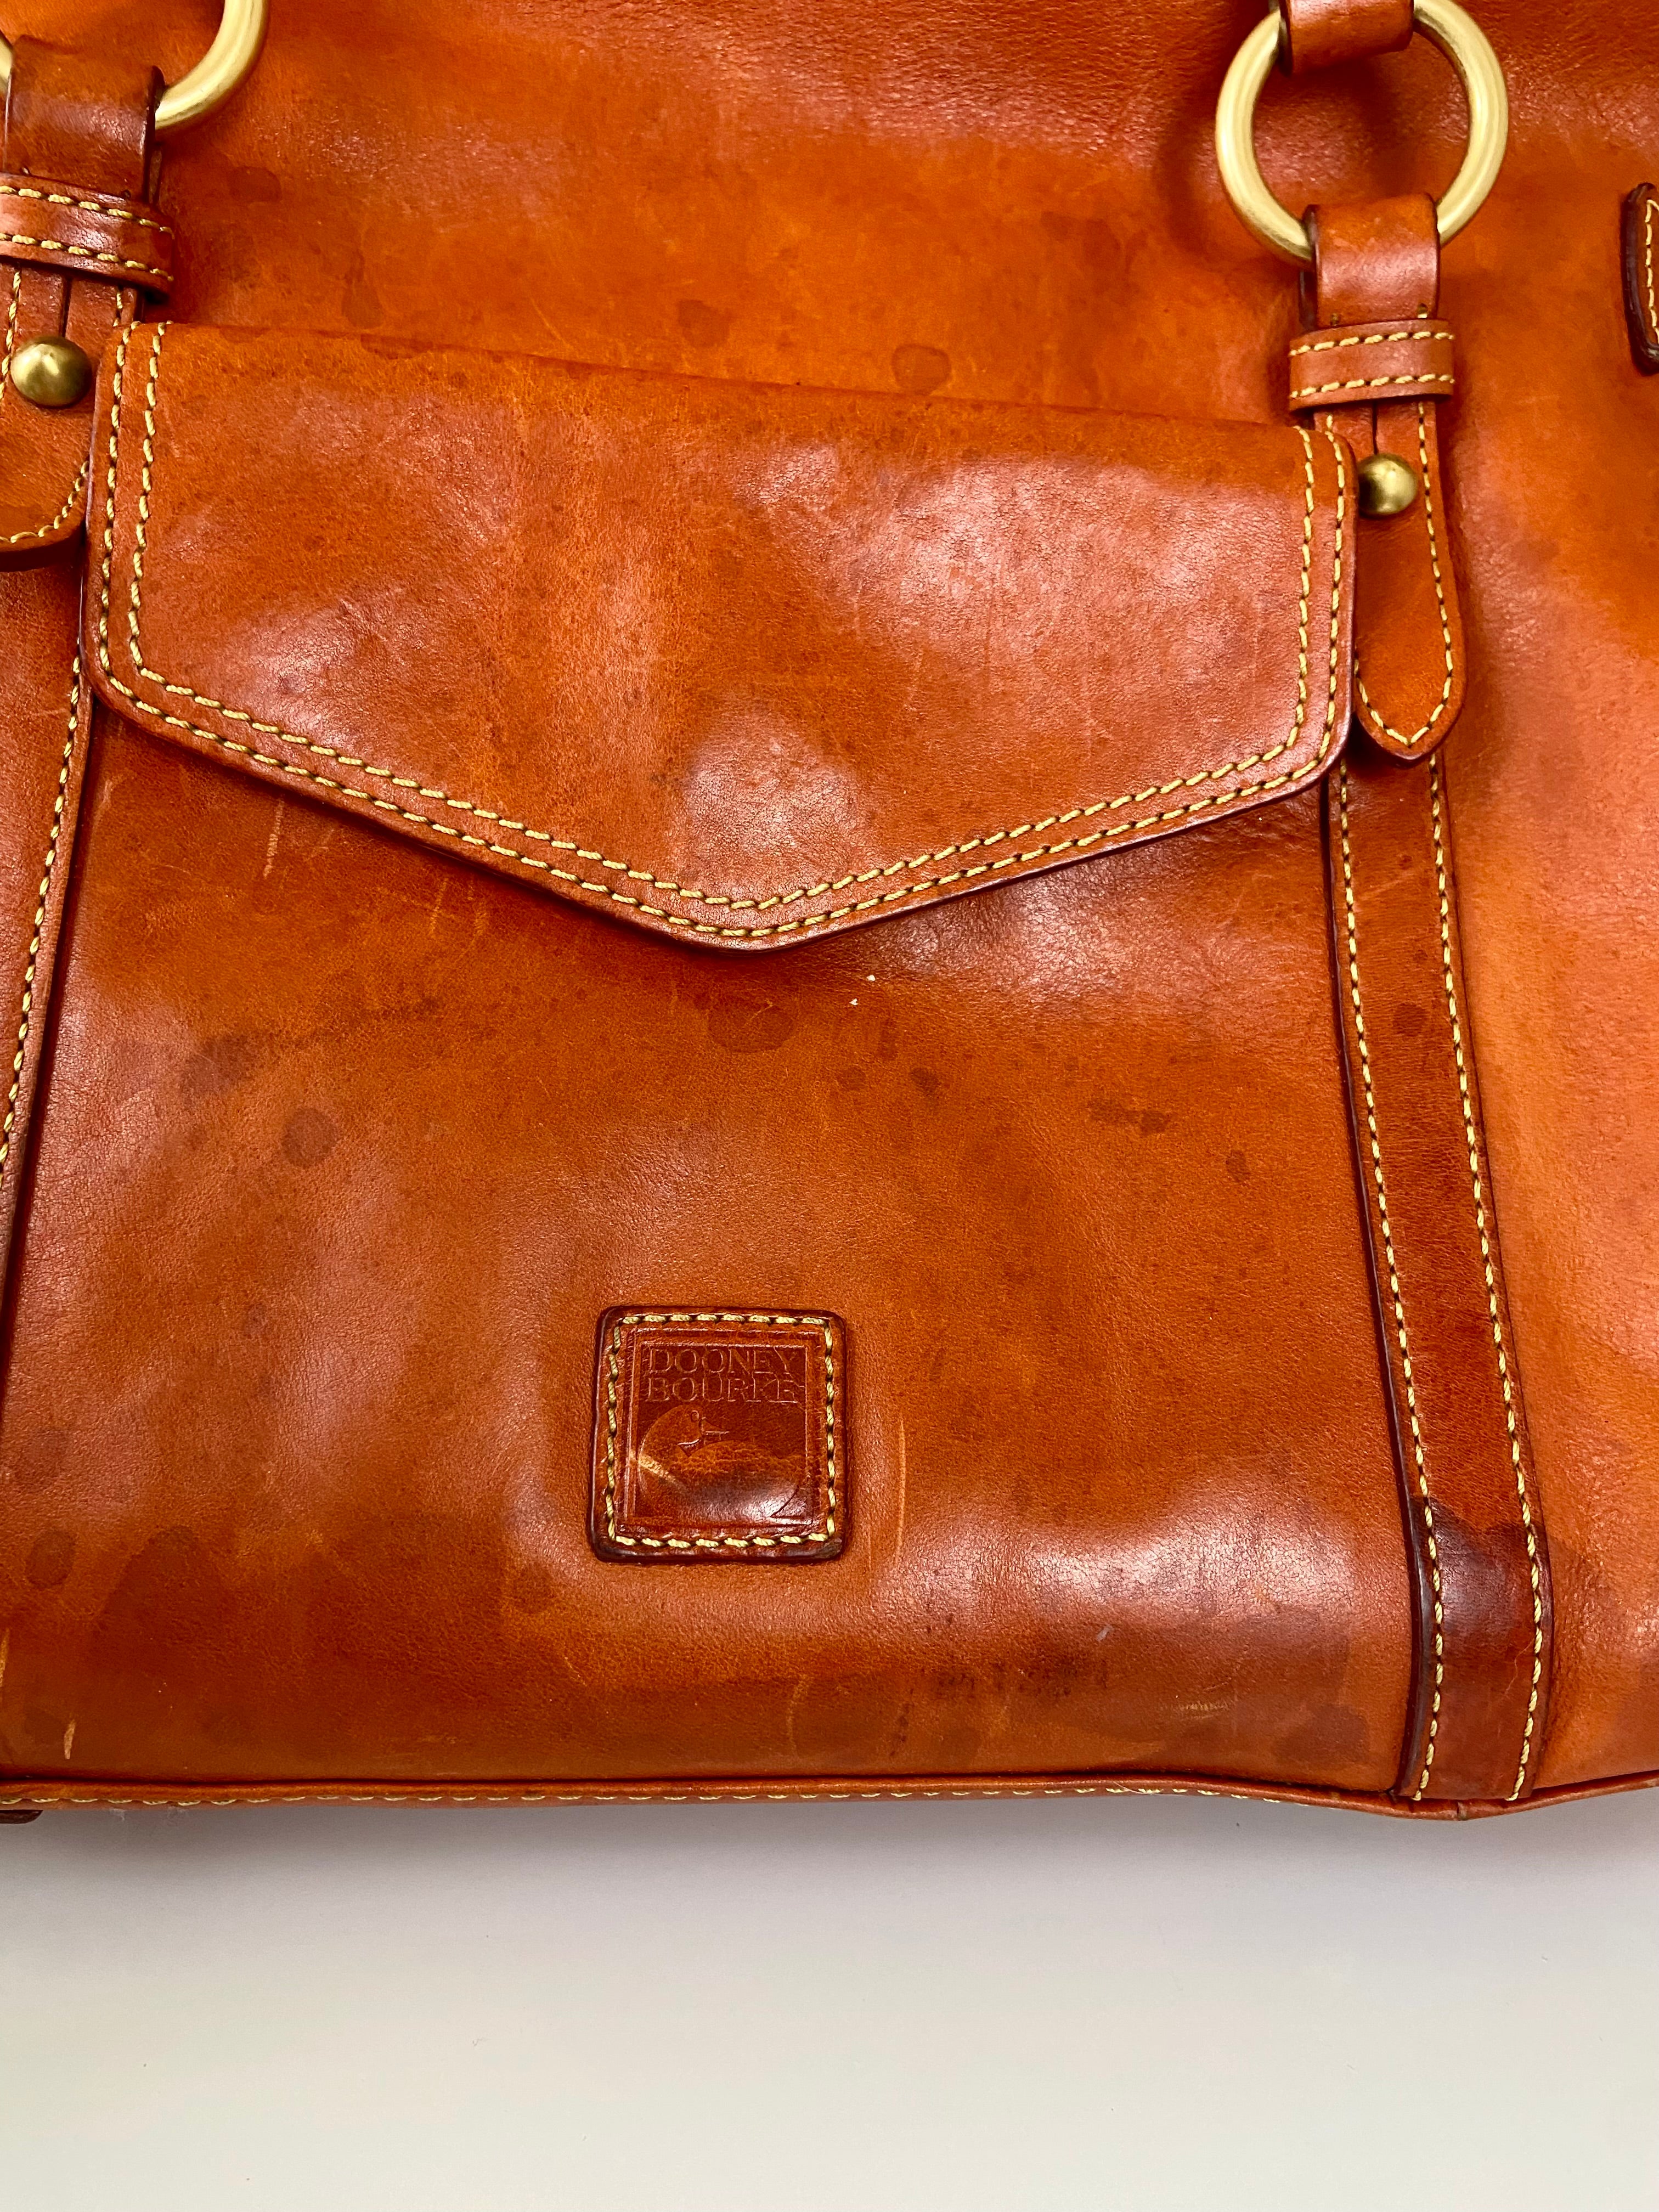 Dooney & Bourke Florentine Smith
Bag in natural leather